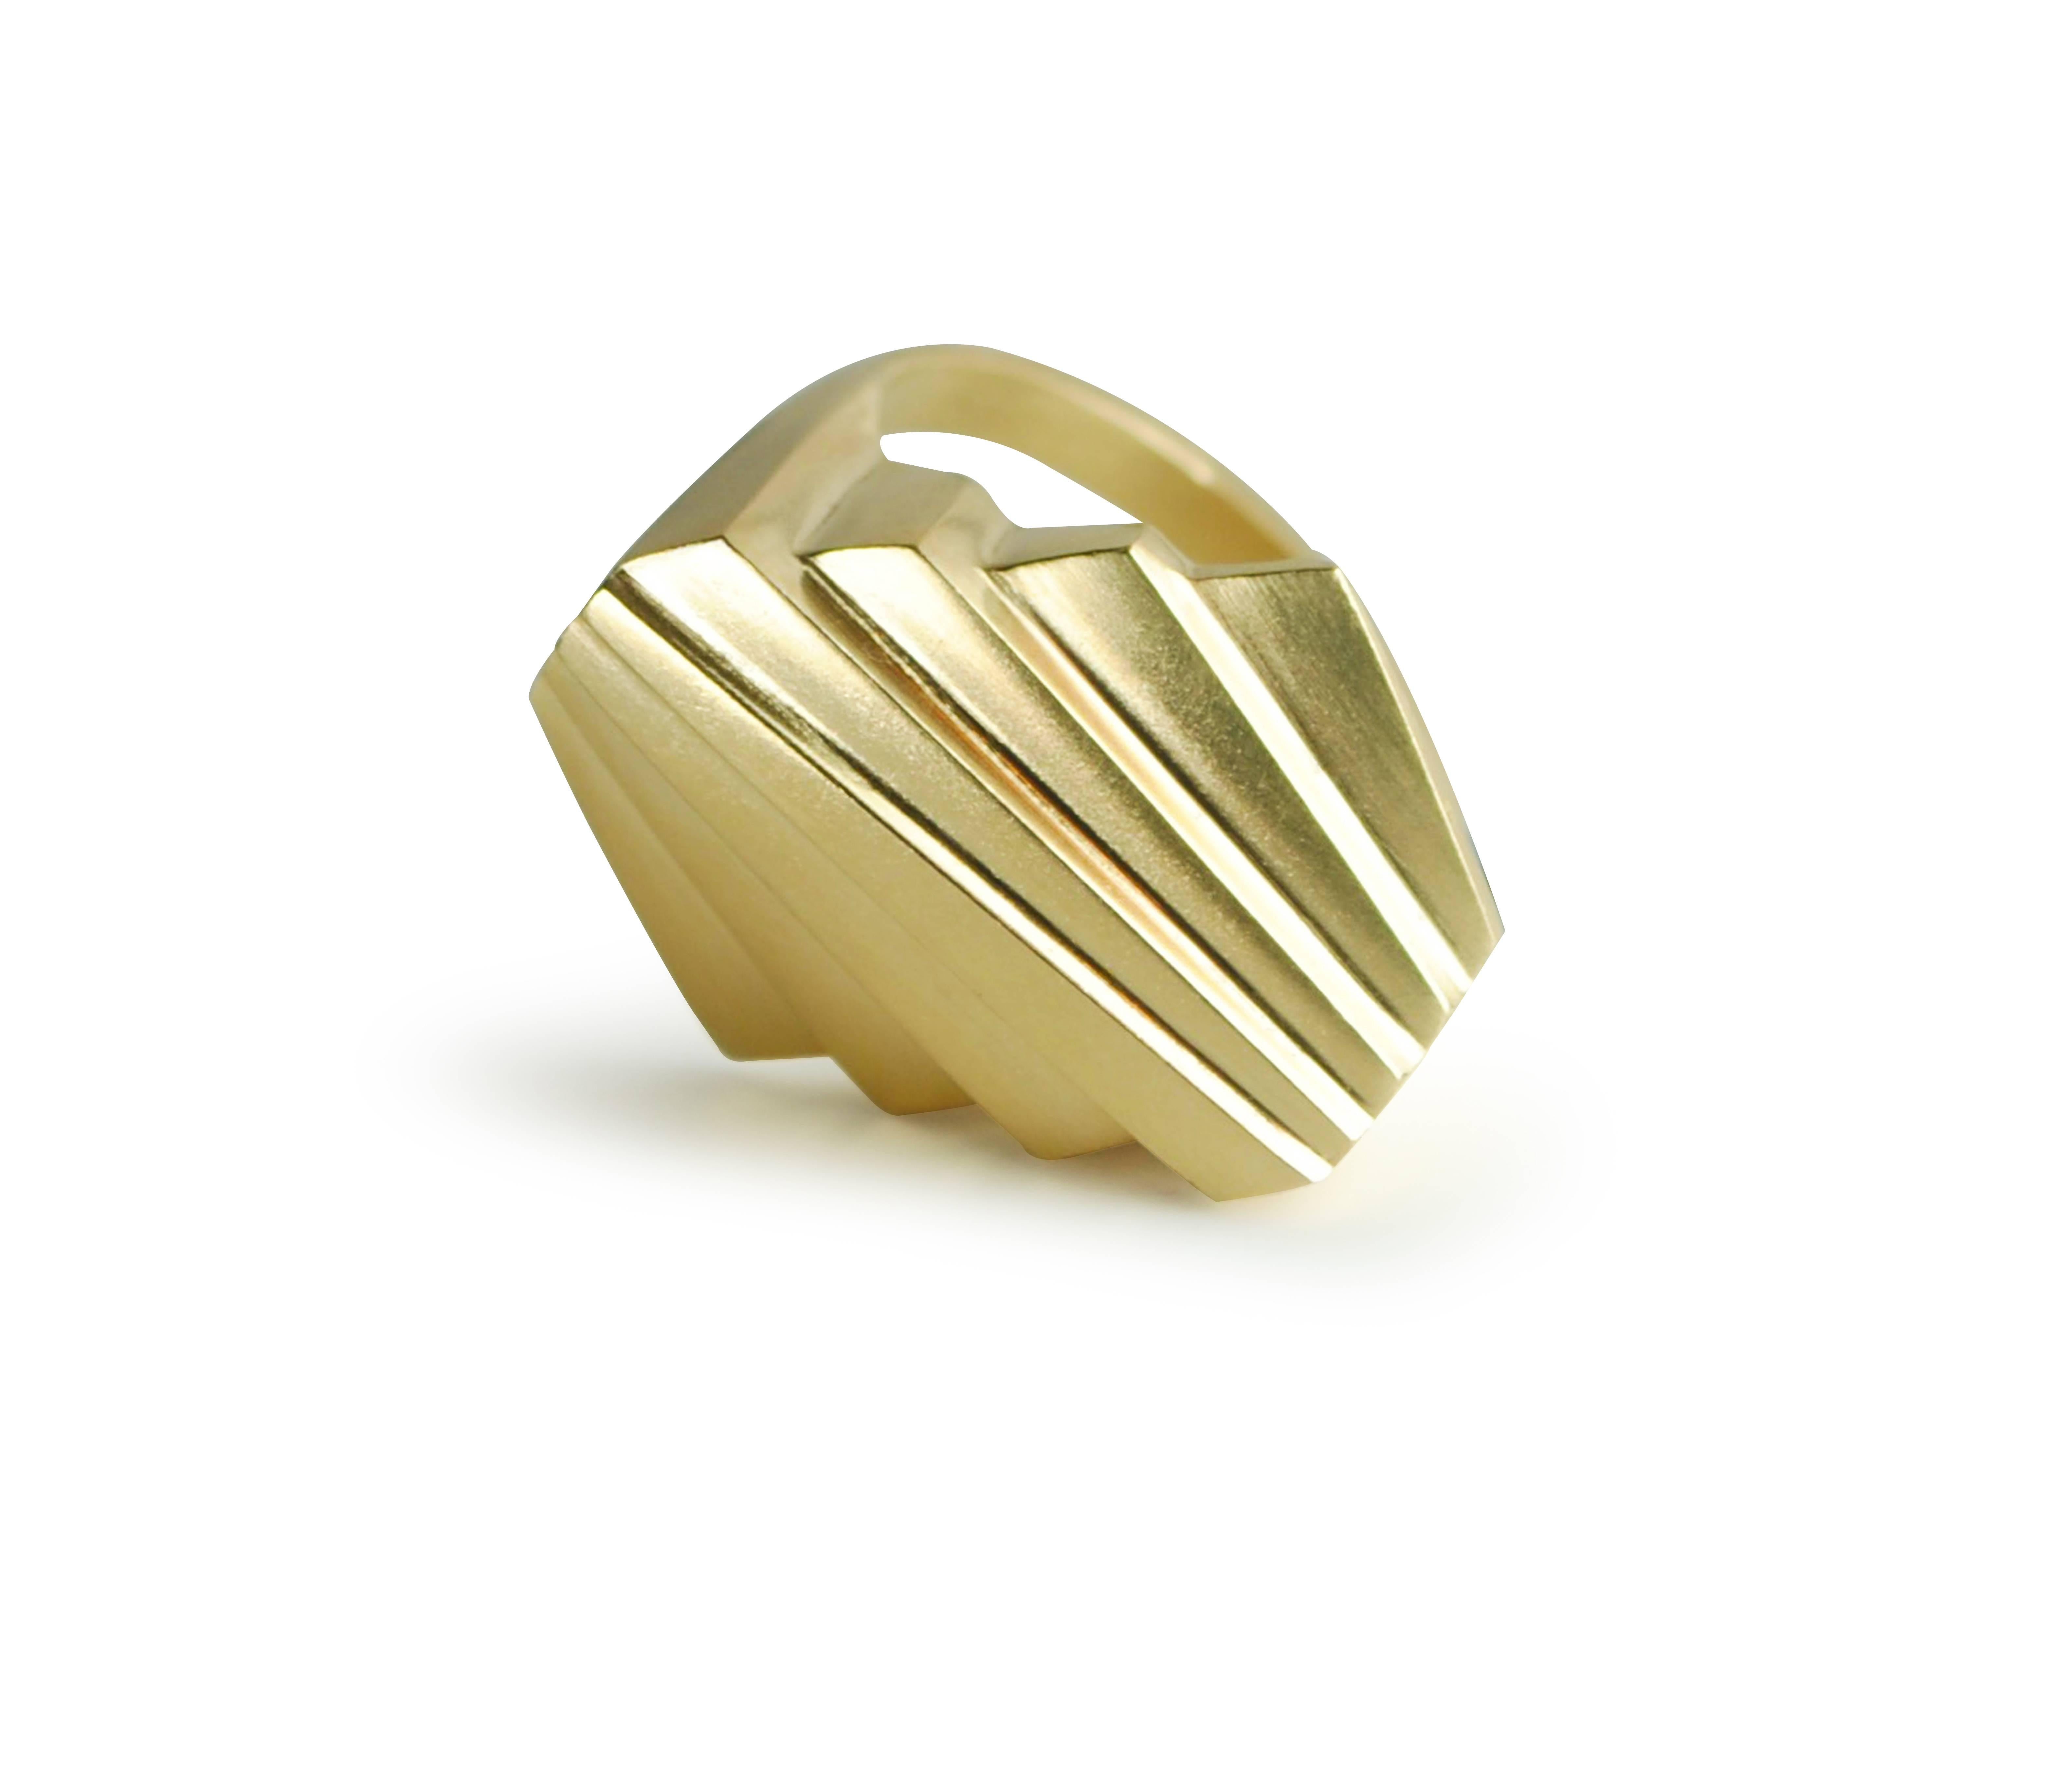 The 18 Karat Gold Twin Deco ring is a beautiful yet subtle statement piece. Catching light, the Art Deco steps fan approach  echoes classy influence with quiet elegance in gold.

Designed and created in Dublin, Ireland.